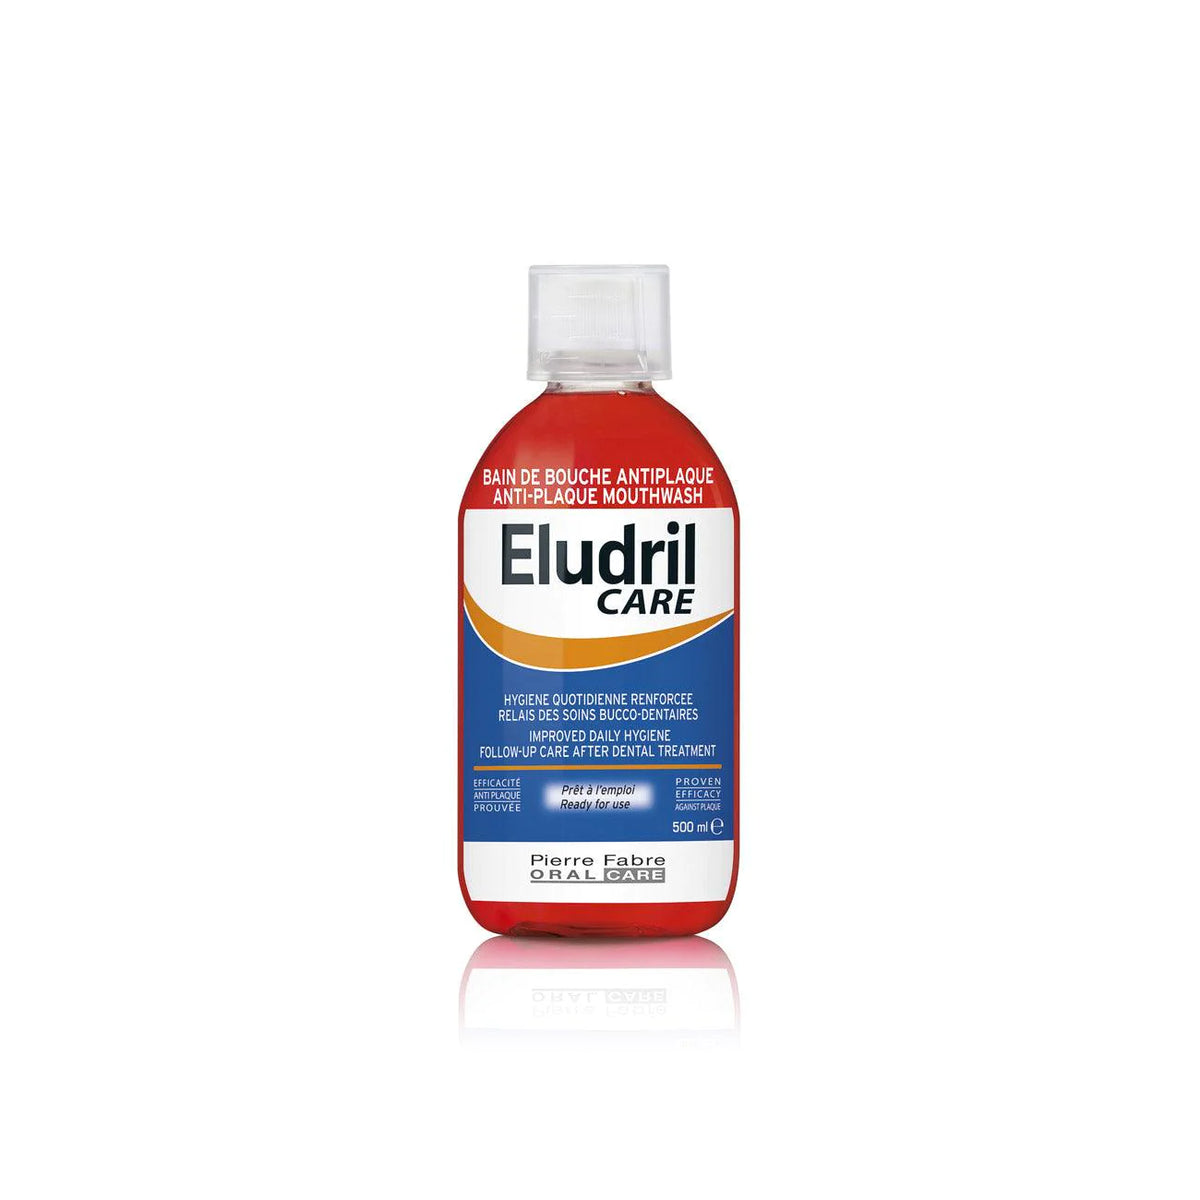 Eludril Care Mouth Wash